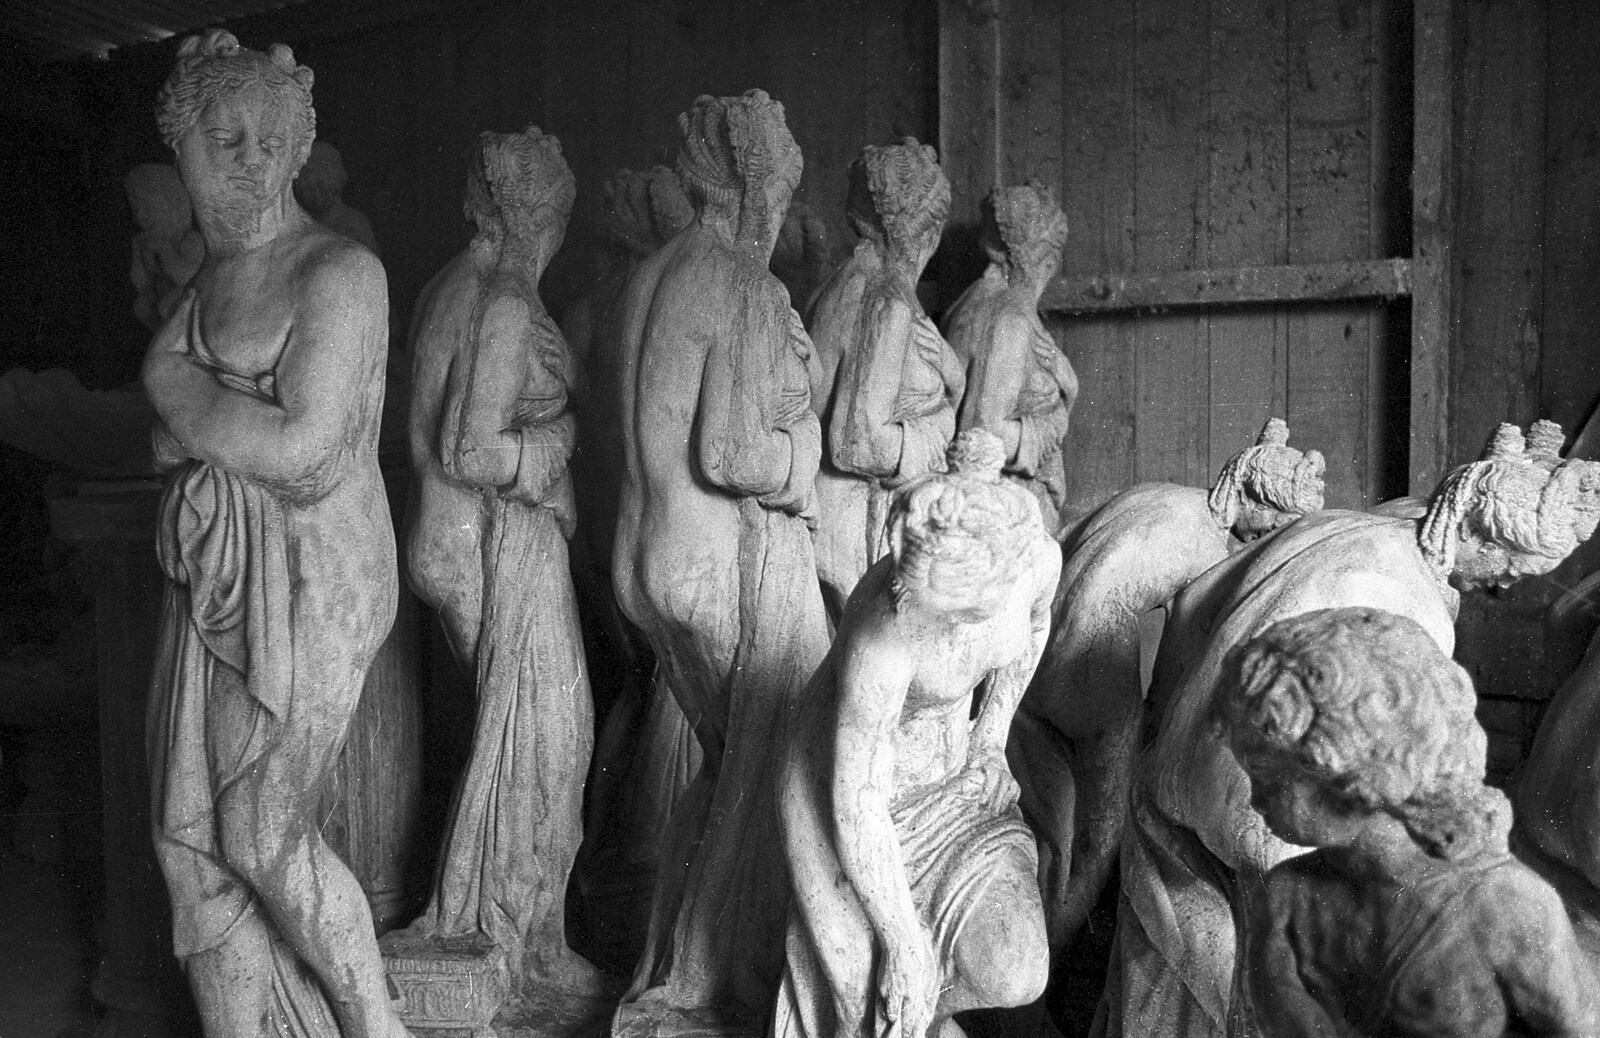 Aphrodites in the shed from A Black and White Life in Concrete, Stuston, Suffolk - 3rd September 1992